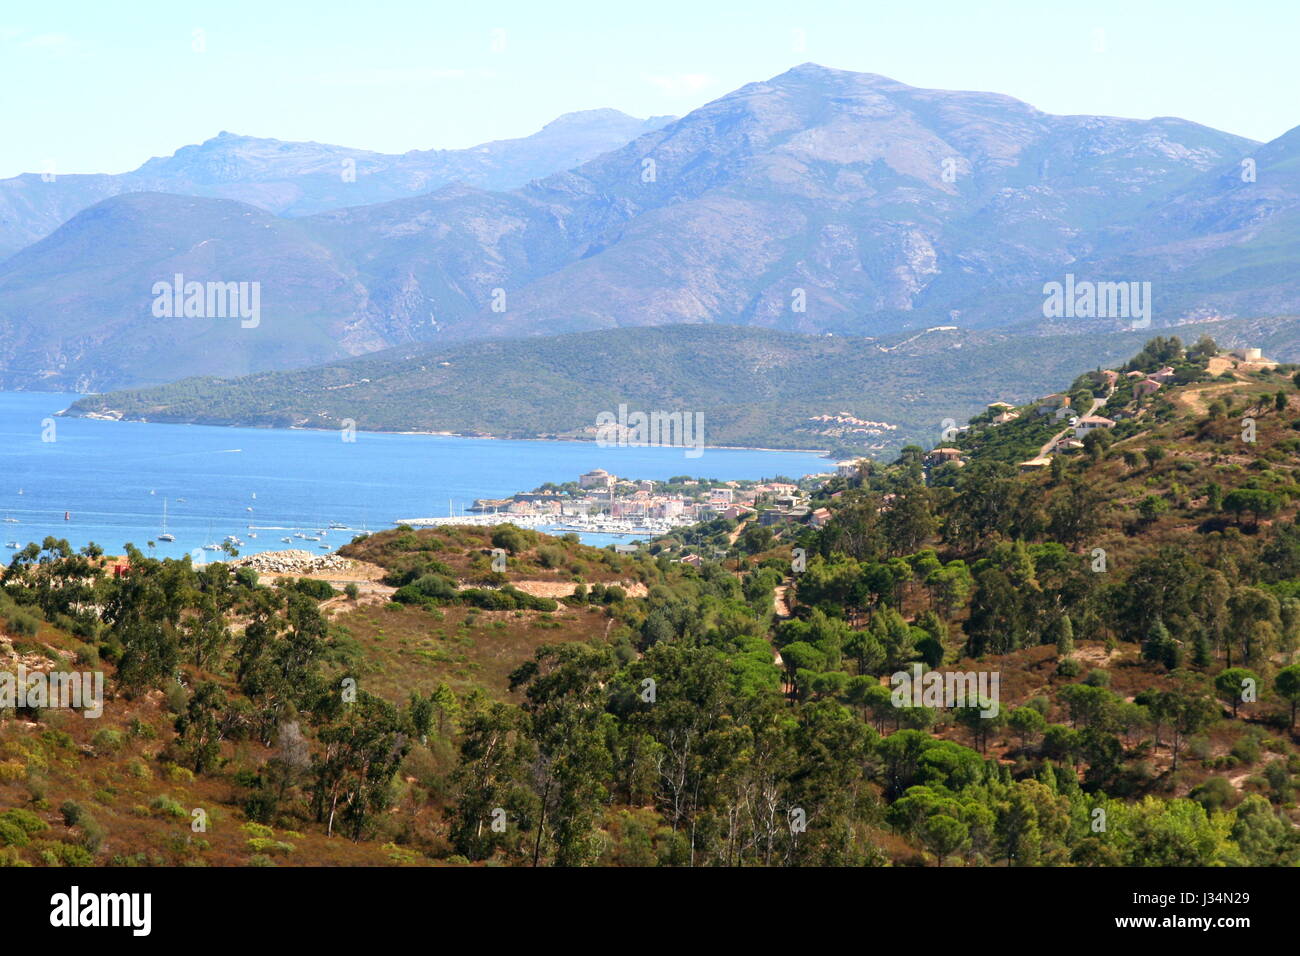 Panoramic view of the  small coastal town of St Florent in Northern Corsica, France, seen from nearby hilltop. Stock Photo